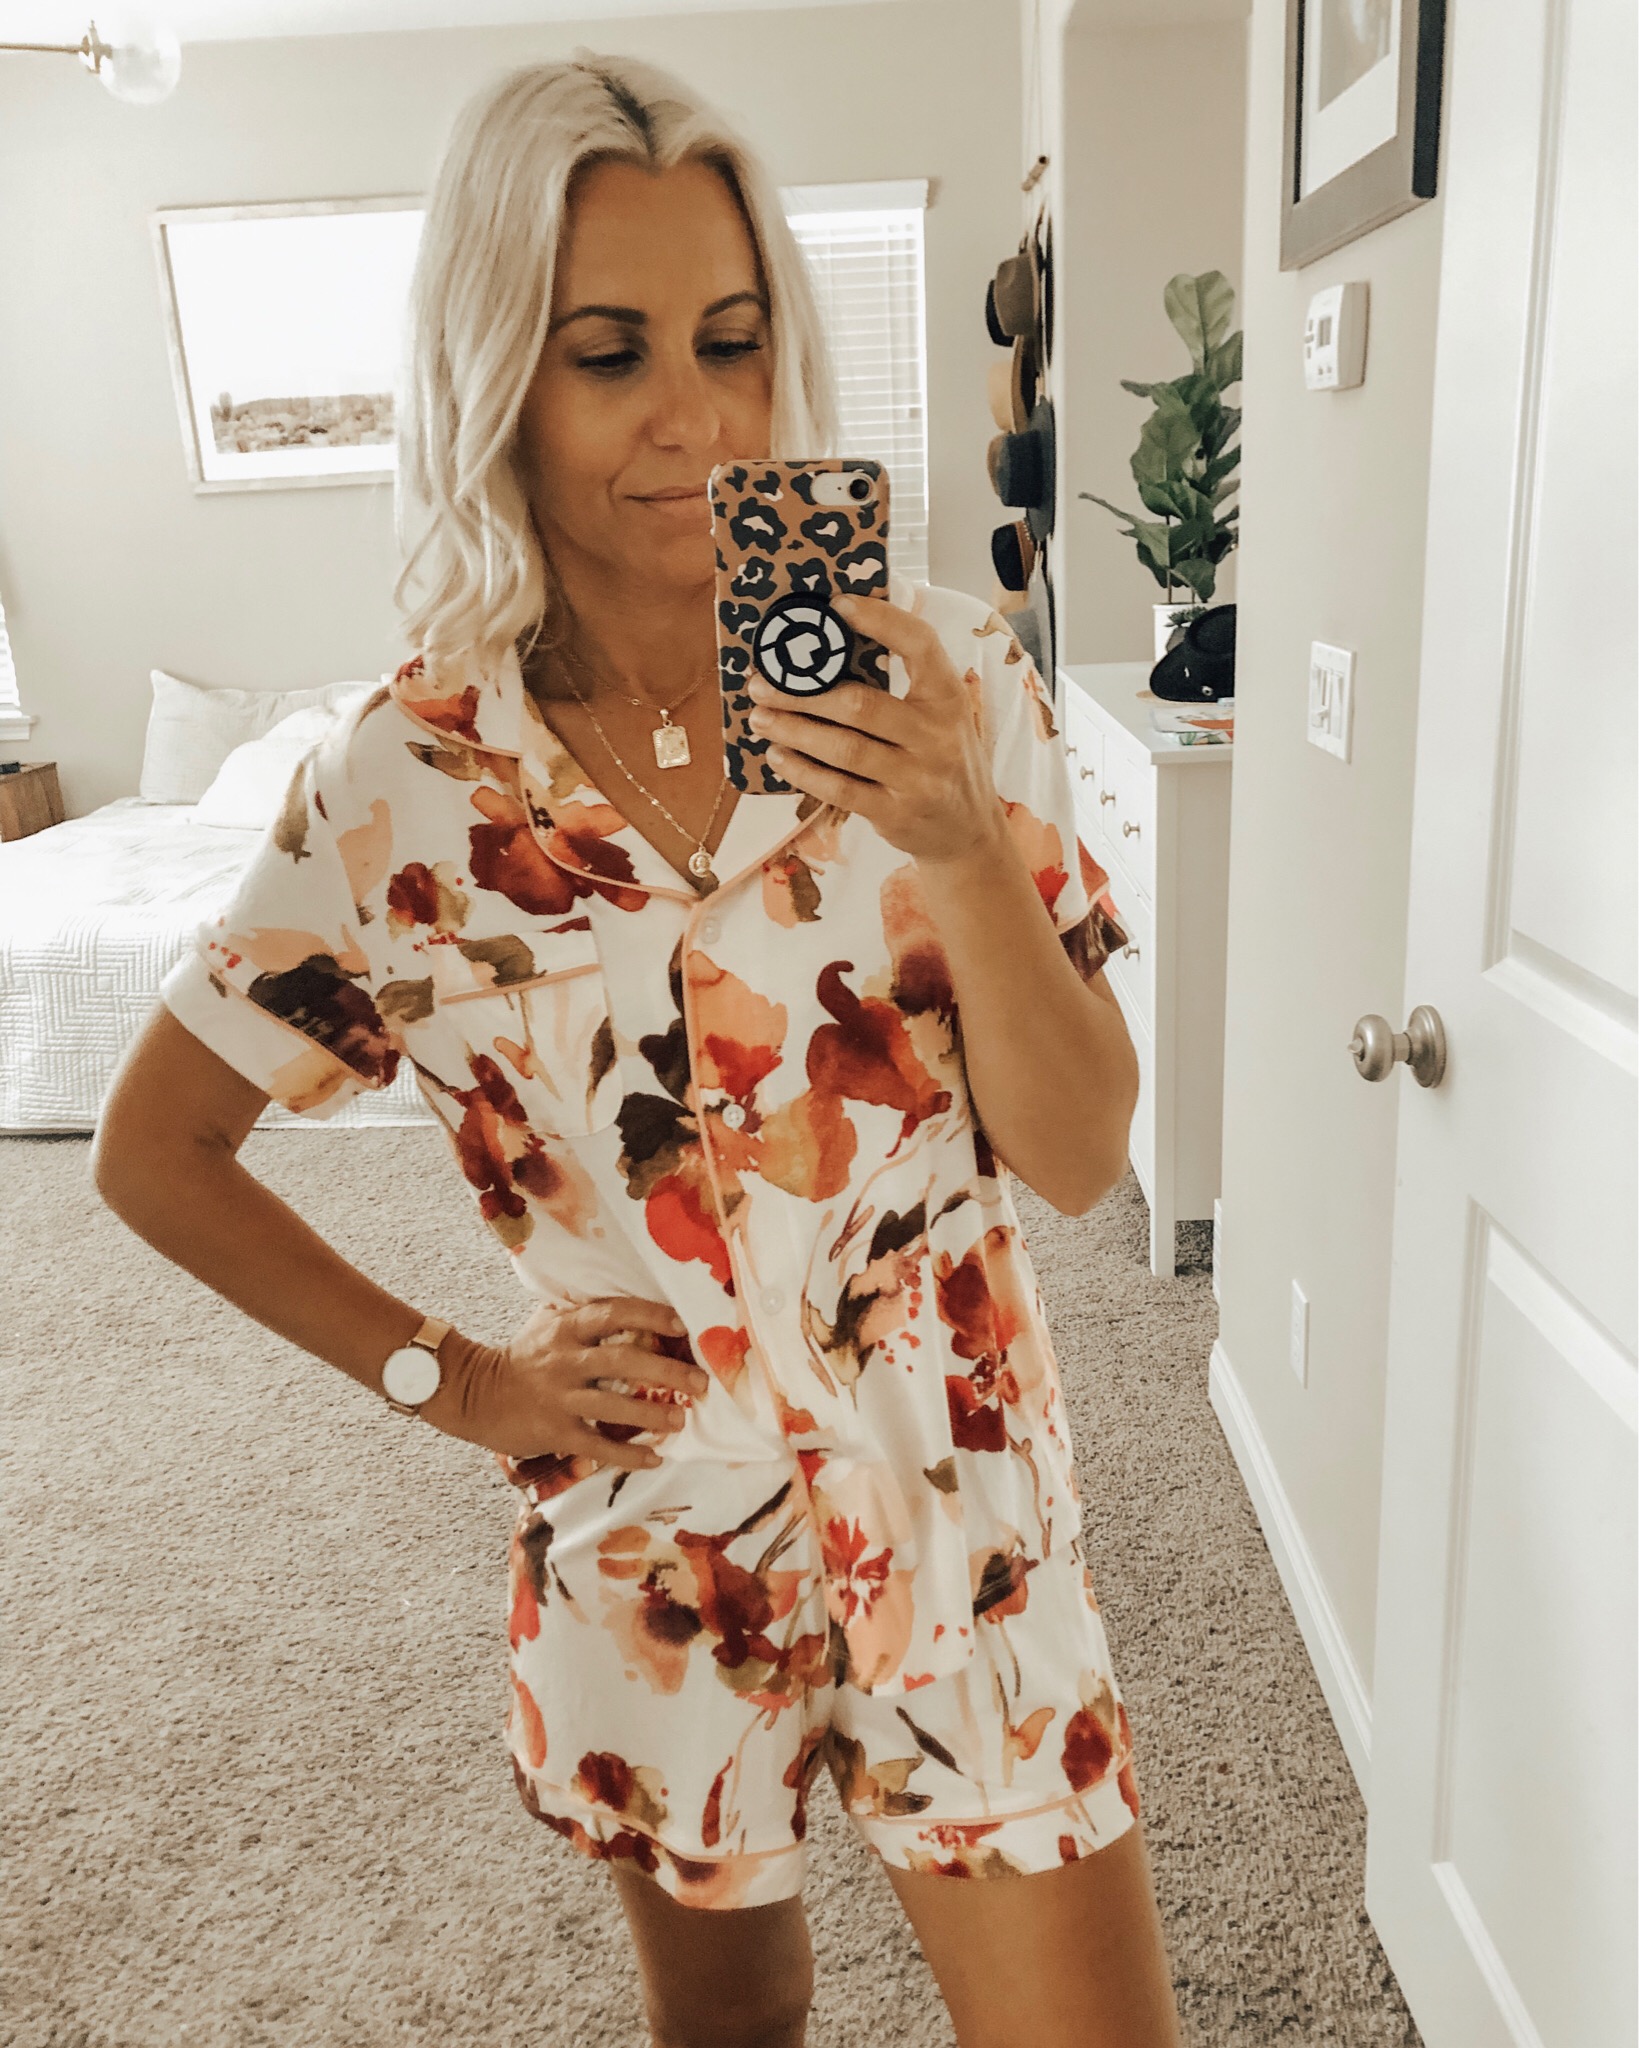 THE COZIEST PAJAMA SETS- Jaclyn De Leon Style + With a new season comes new pajamas and I have found some of the cutest spring & summer pj sets. Tons of adorable prints with the coziest fabric.